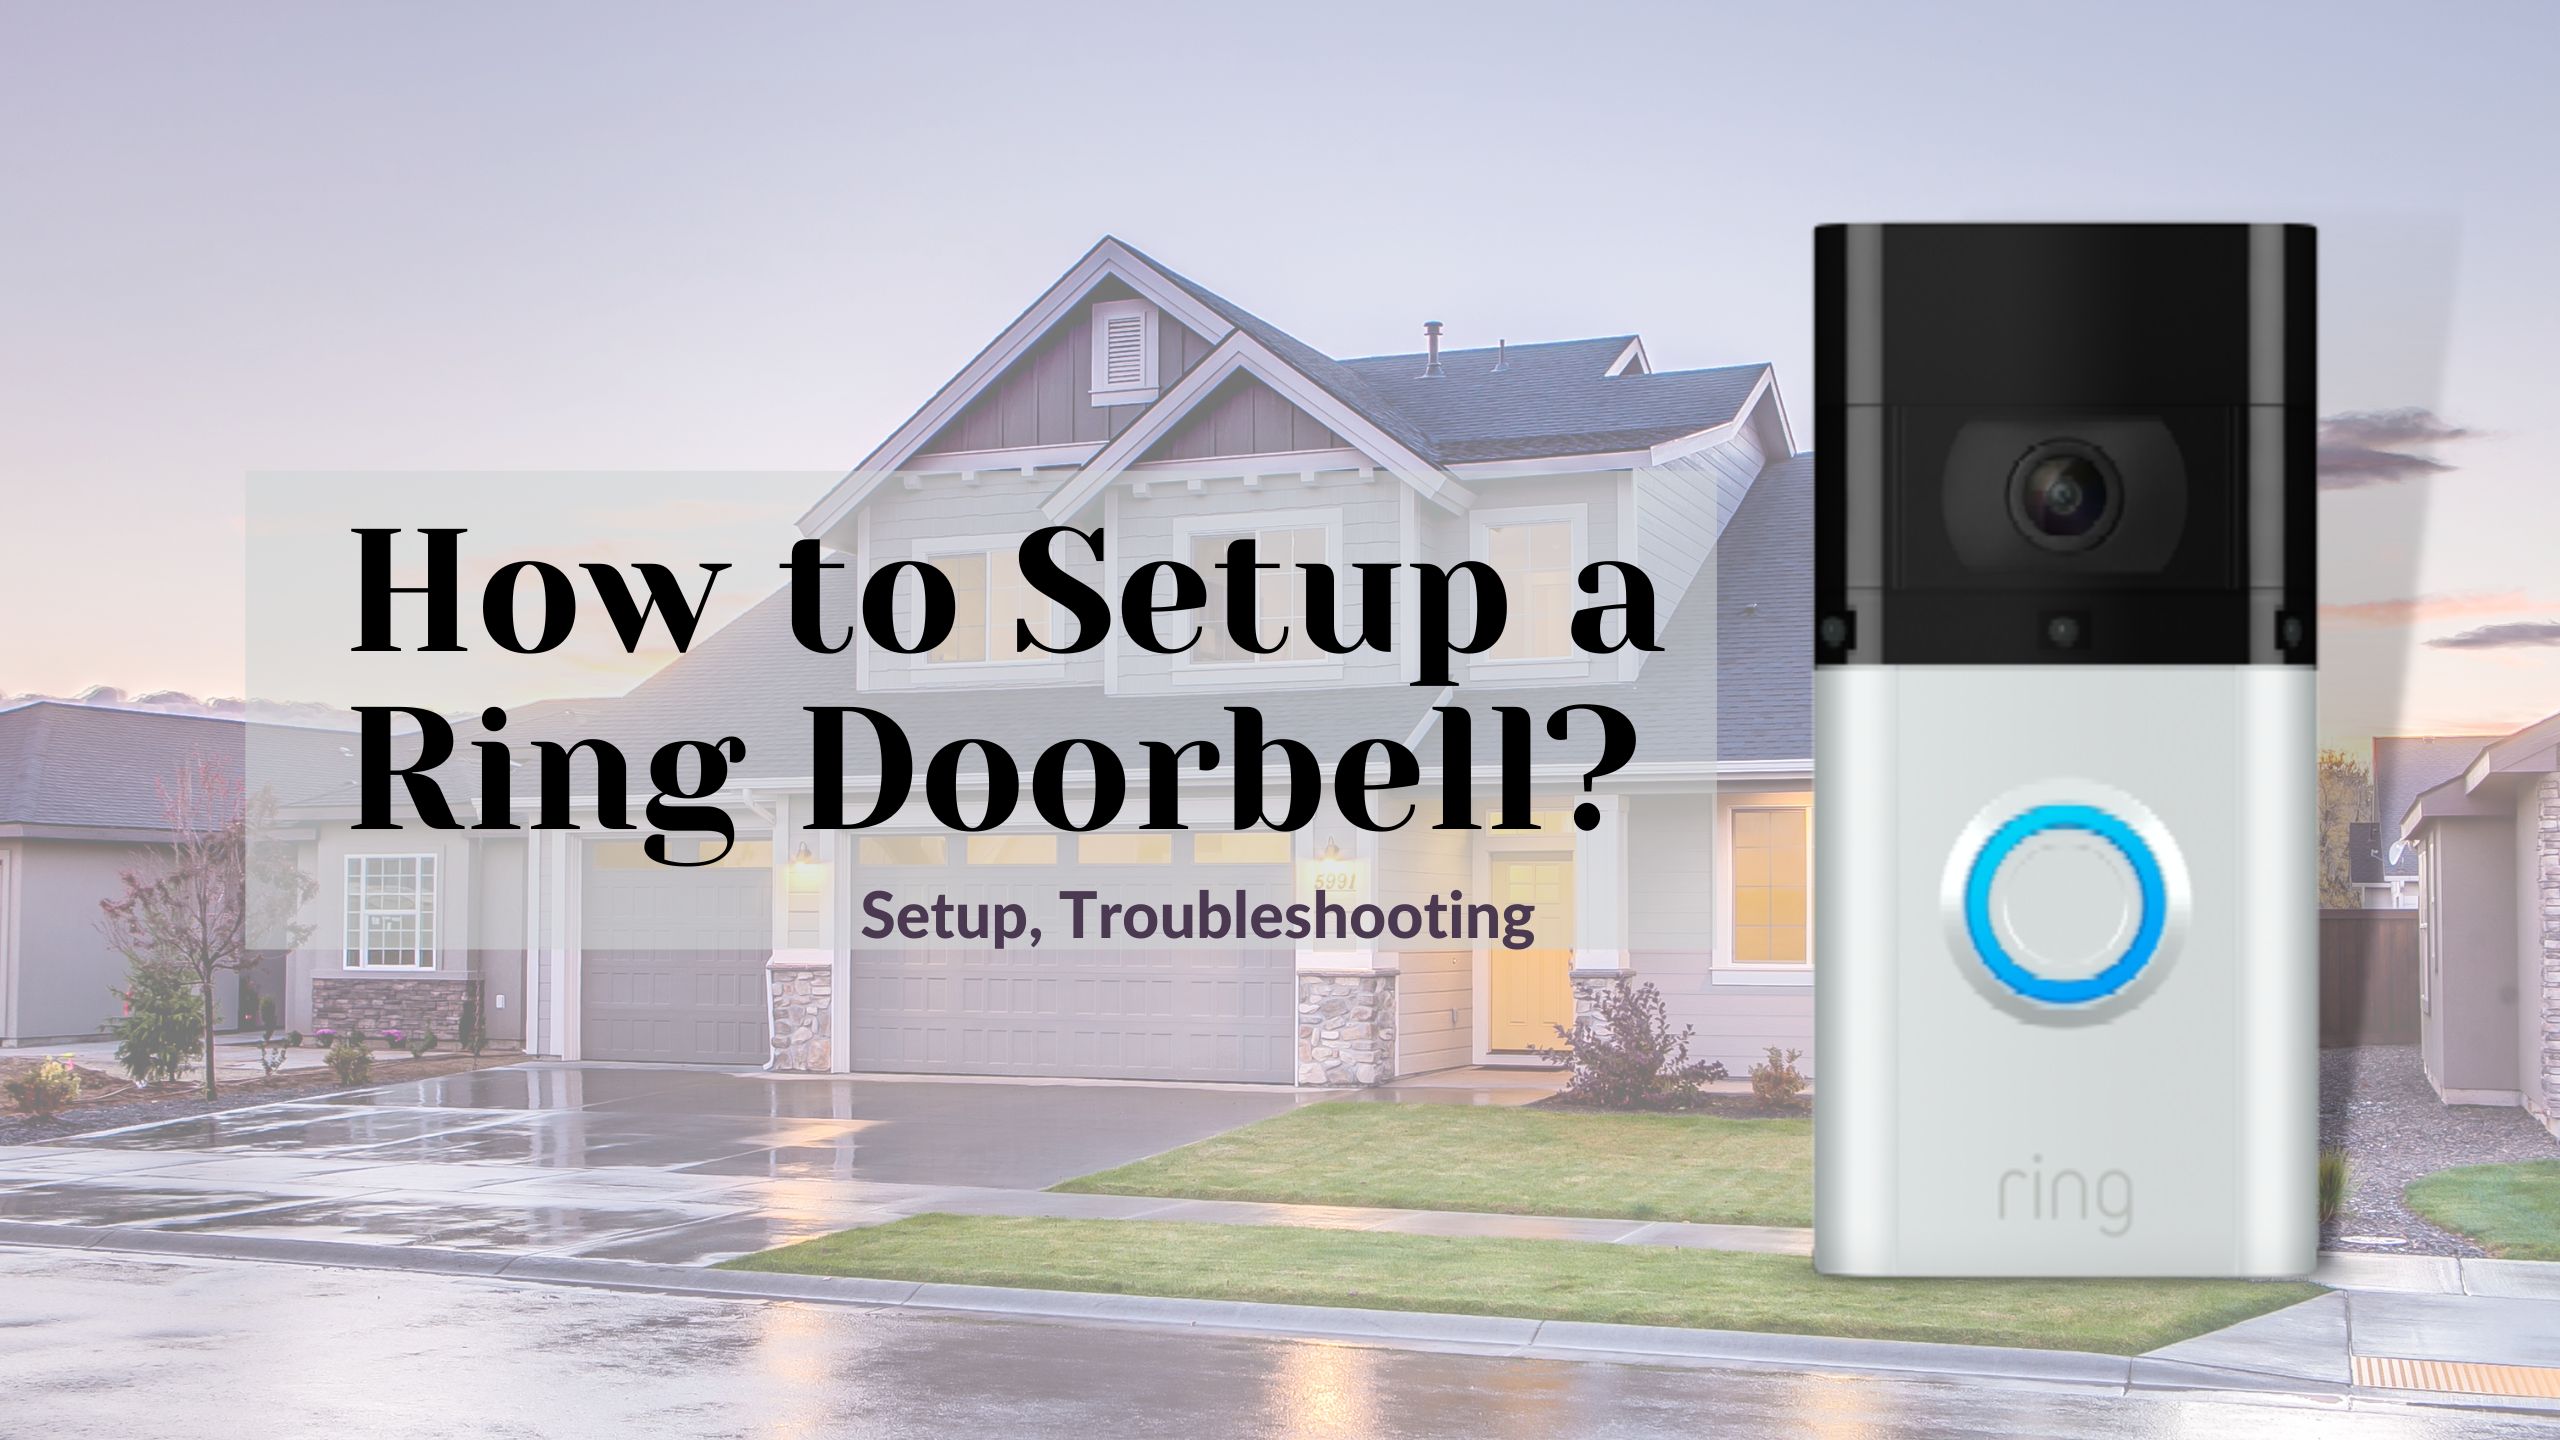 How to Setup a Ring Doorbell